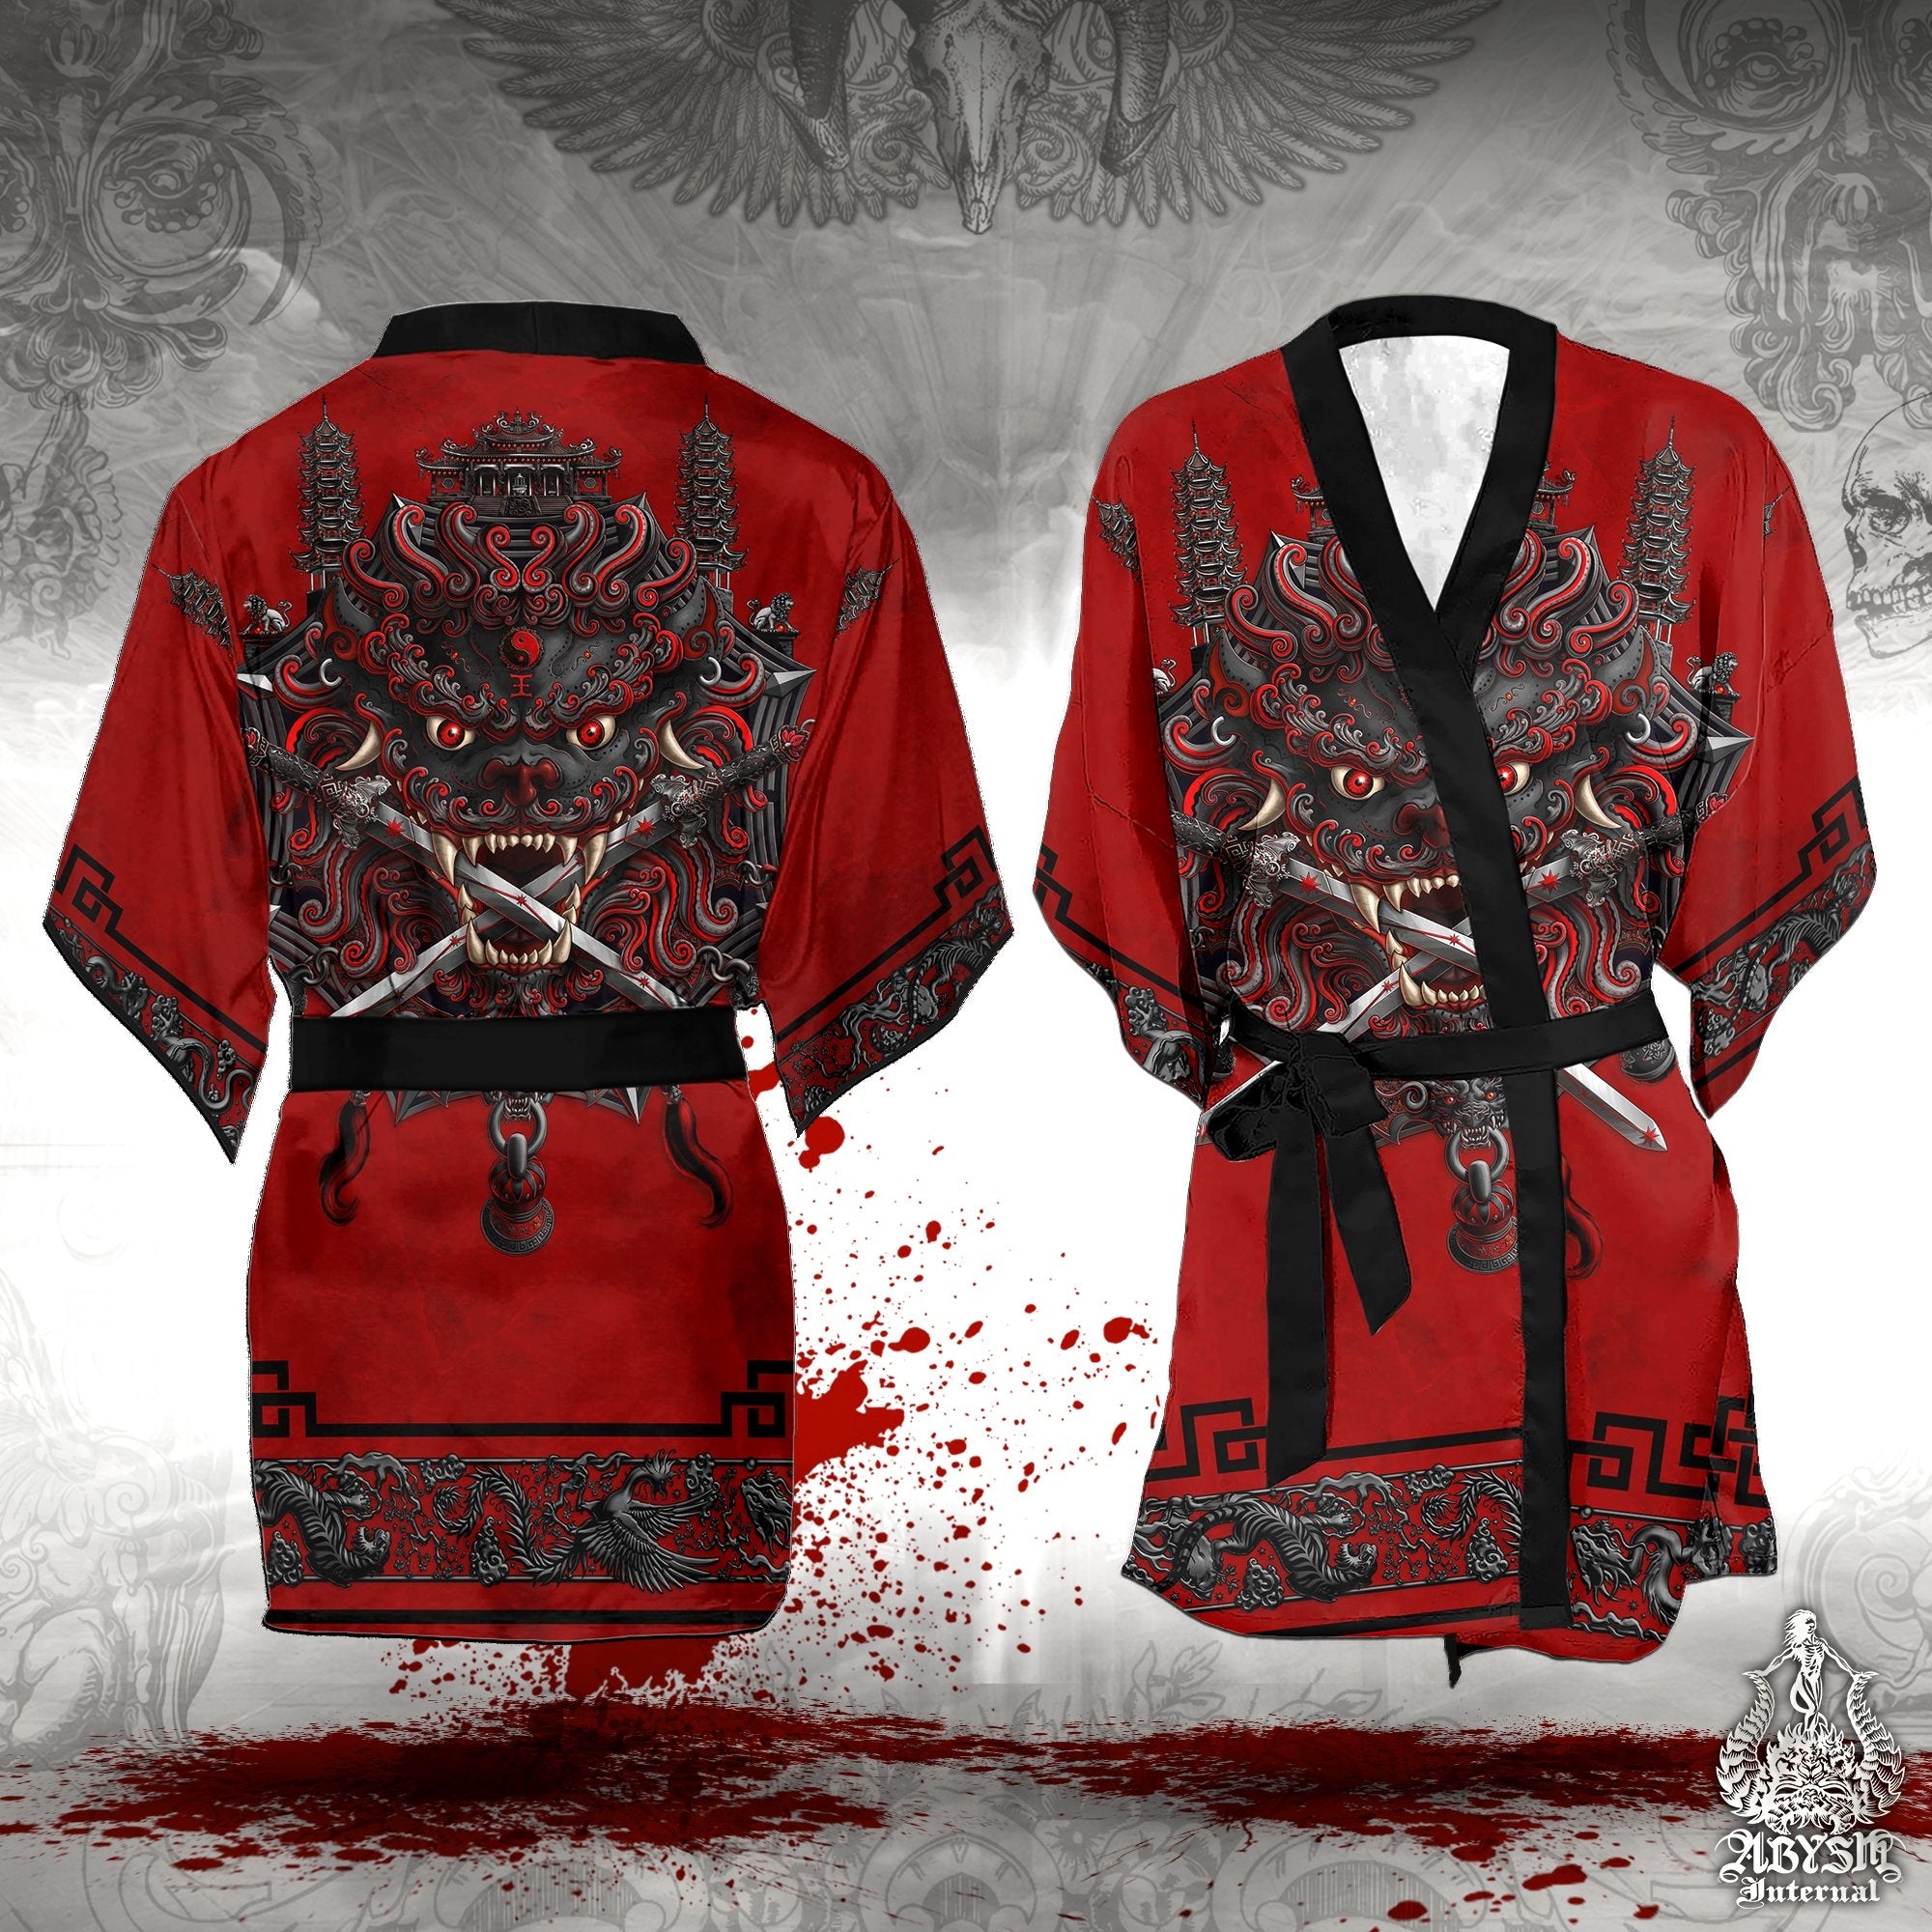 Sword Lion Cover Up, Beach Outfit, Chinese Party Kimono, Taiwan Summer Festival Robe, Asian Indie and Alternative Clothing, Unisex - Gothic - Abysm Internal